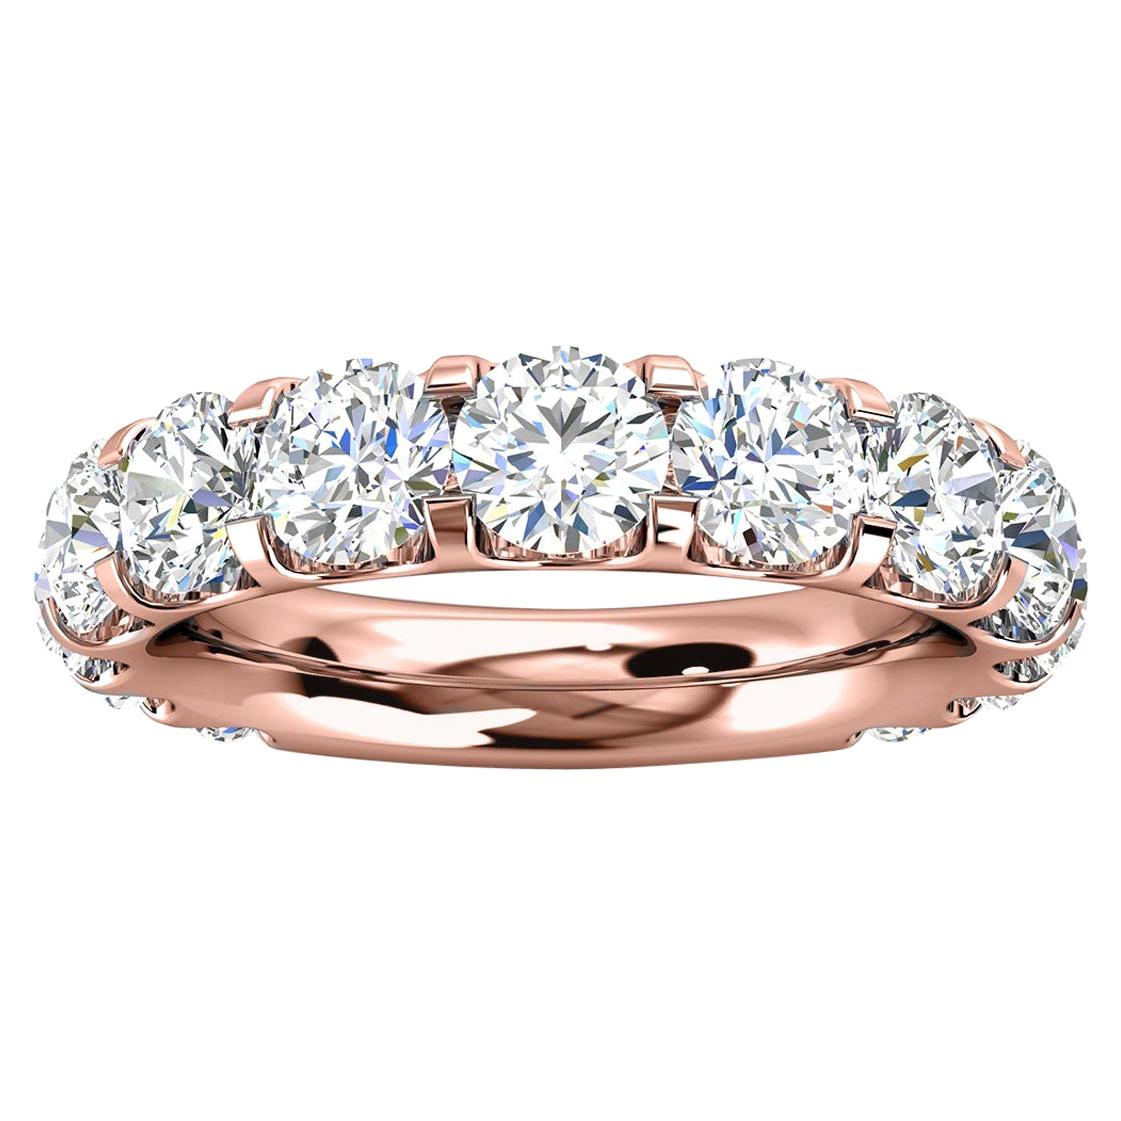 For Sale:  14k Rose Gold Carole Micro-Prong Diamond Ring '3 Ct. tw'